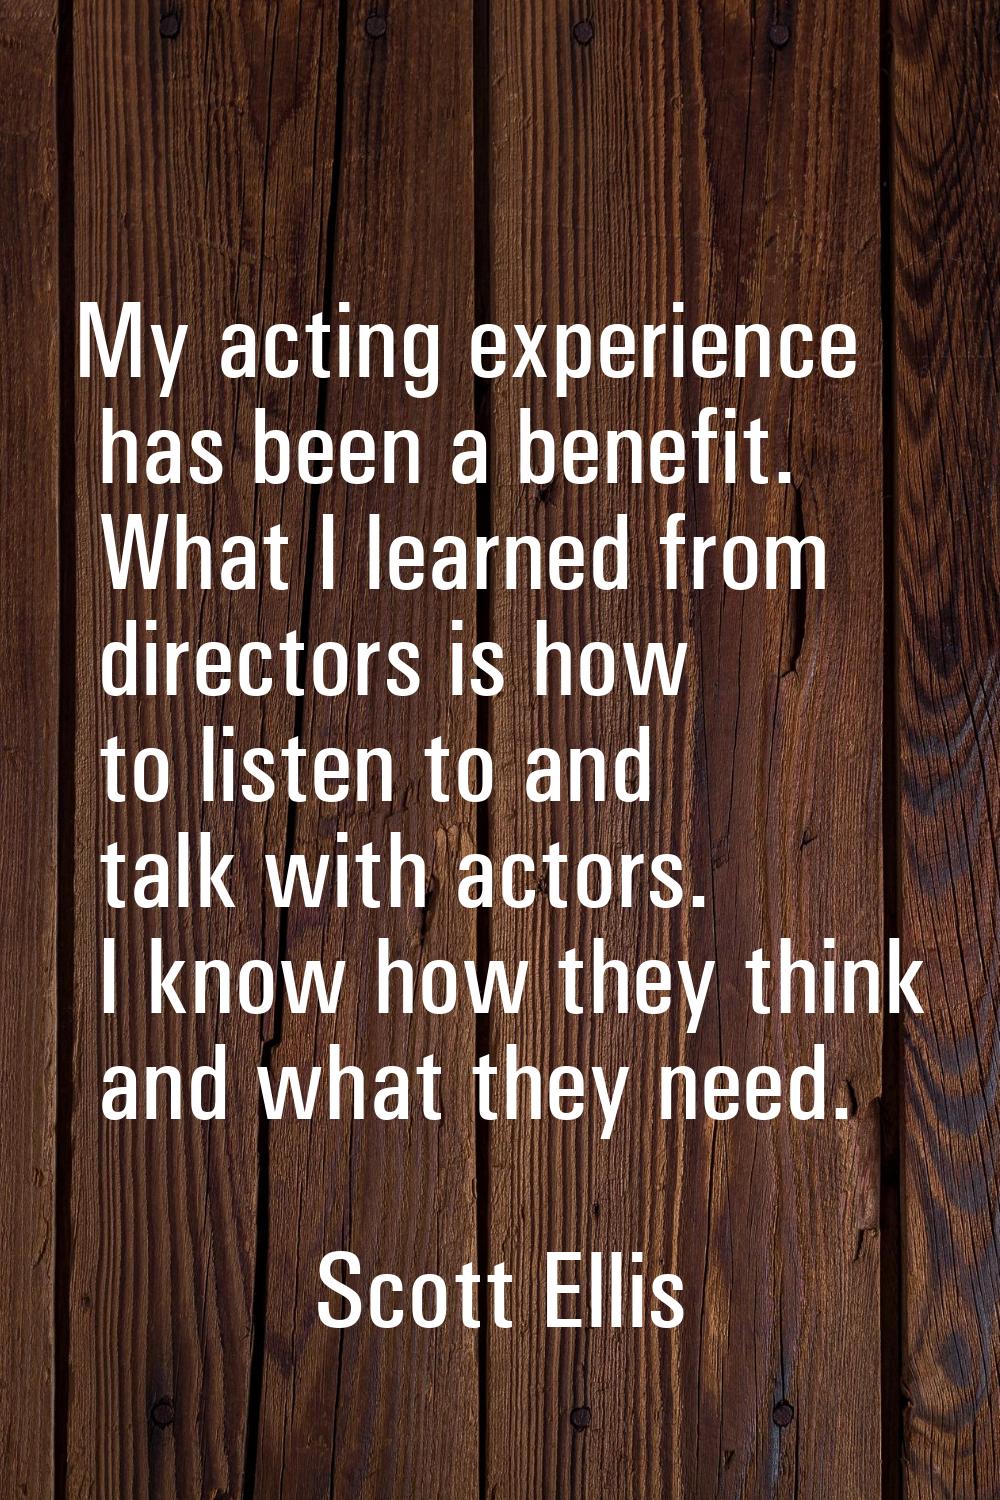 My acting experience has been a benefit. What I learned from directors is how to listen to and talk